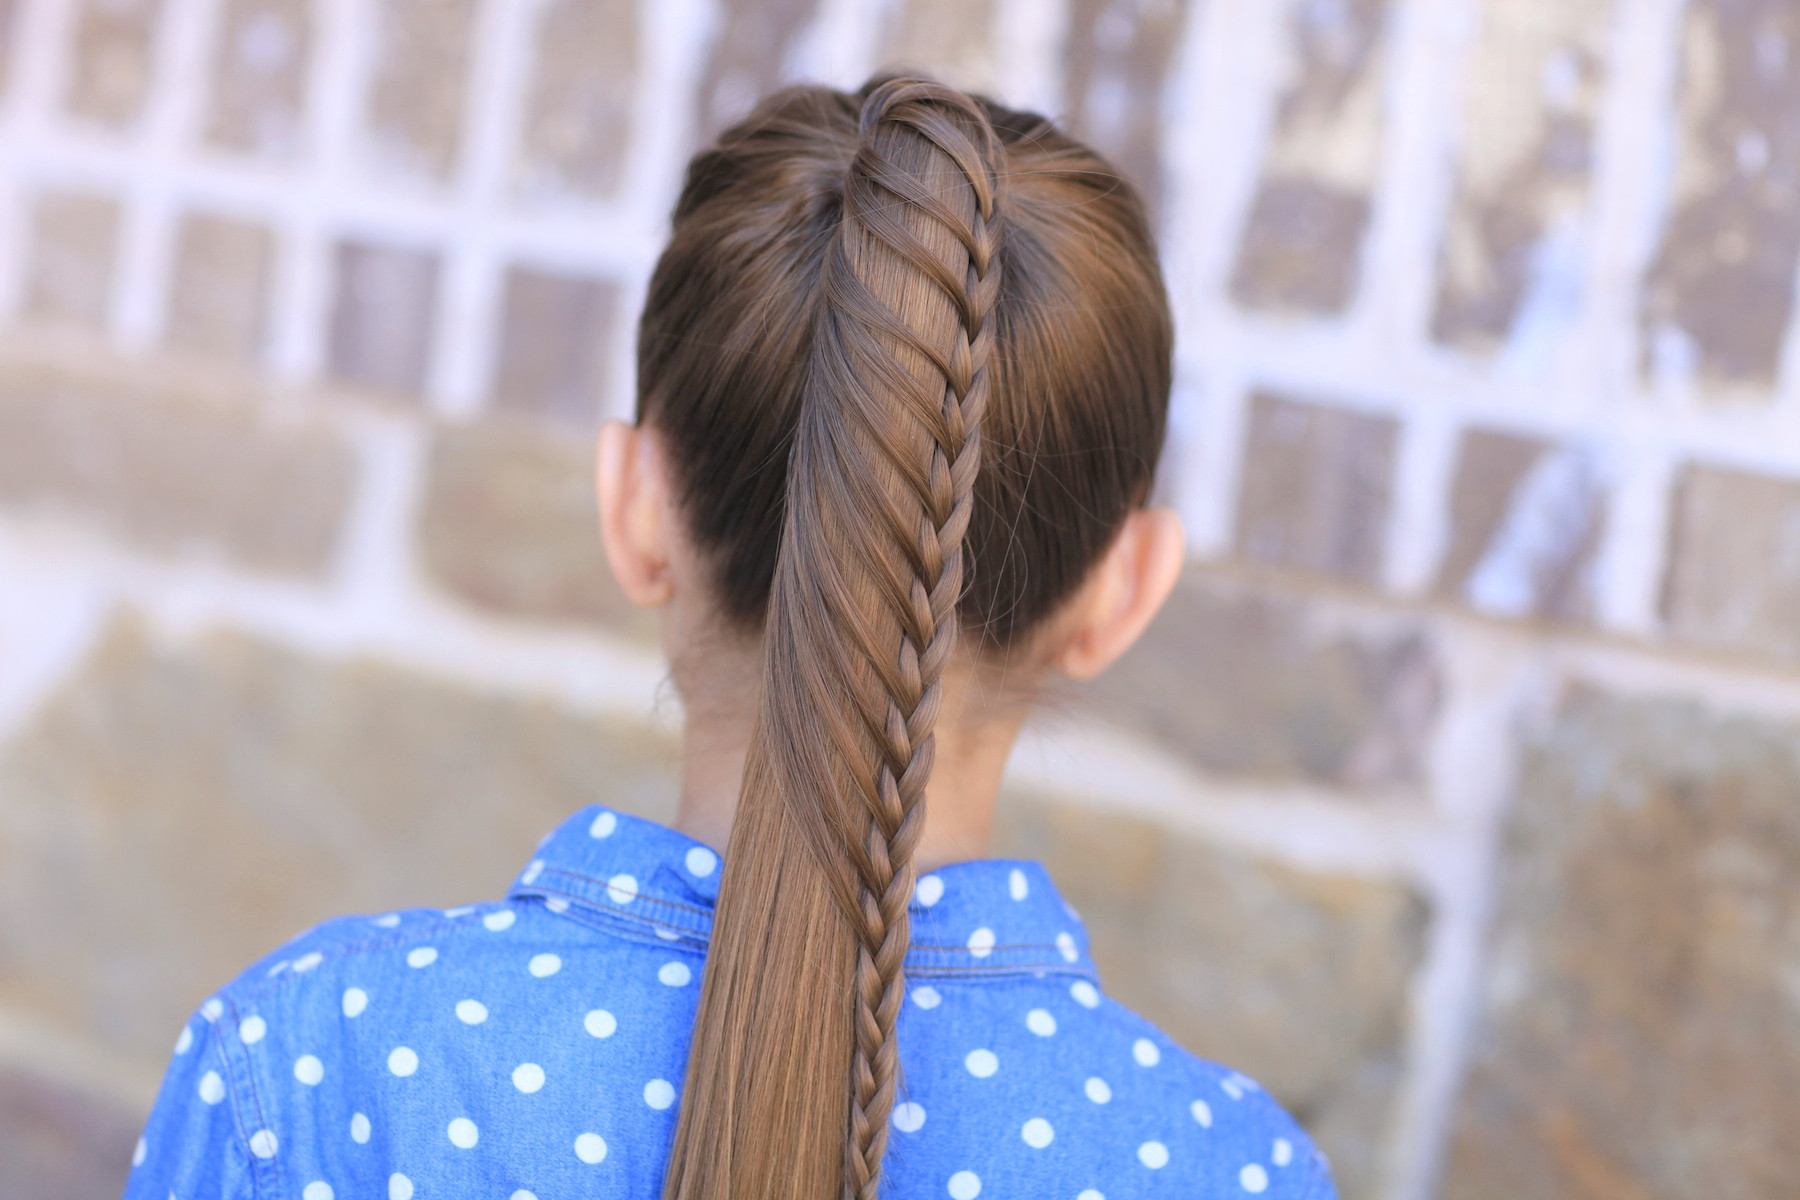 Cute Hairstyles For 13 Year Olds
 10 things to consider before choosing cute hairstyles for